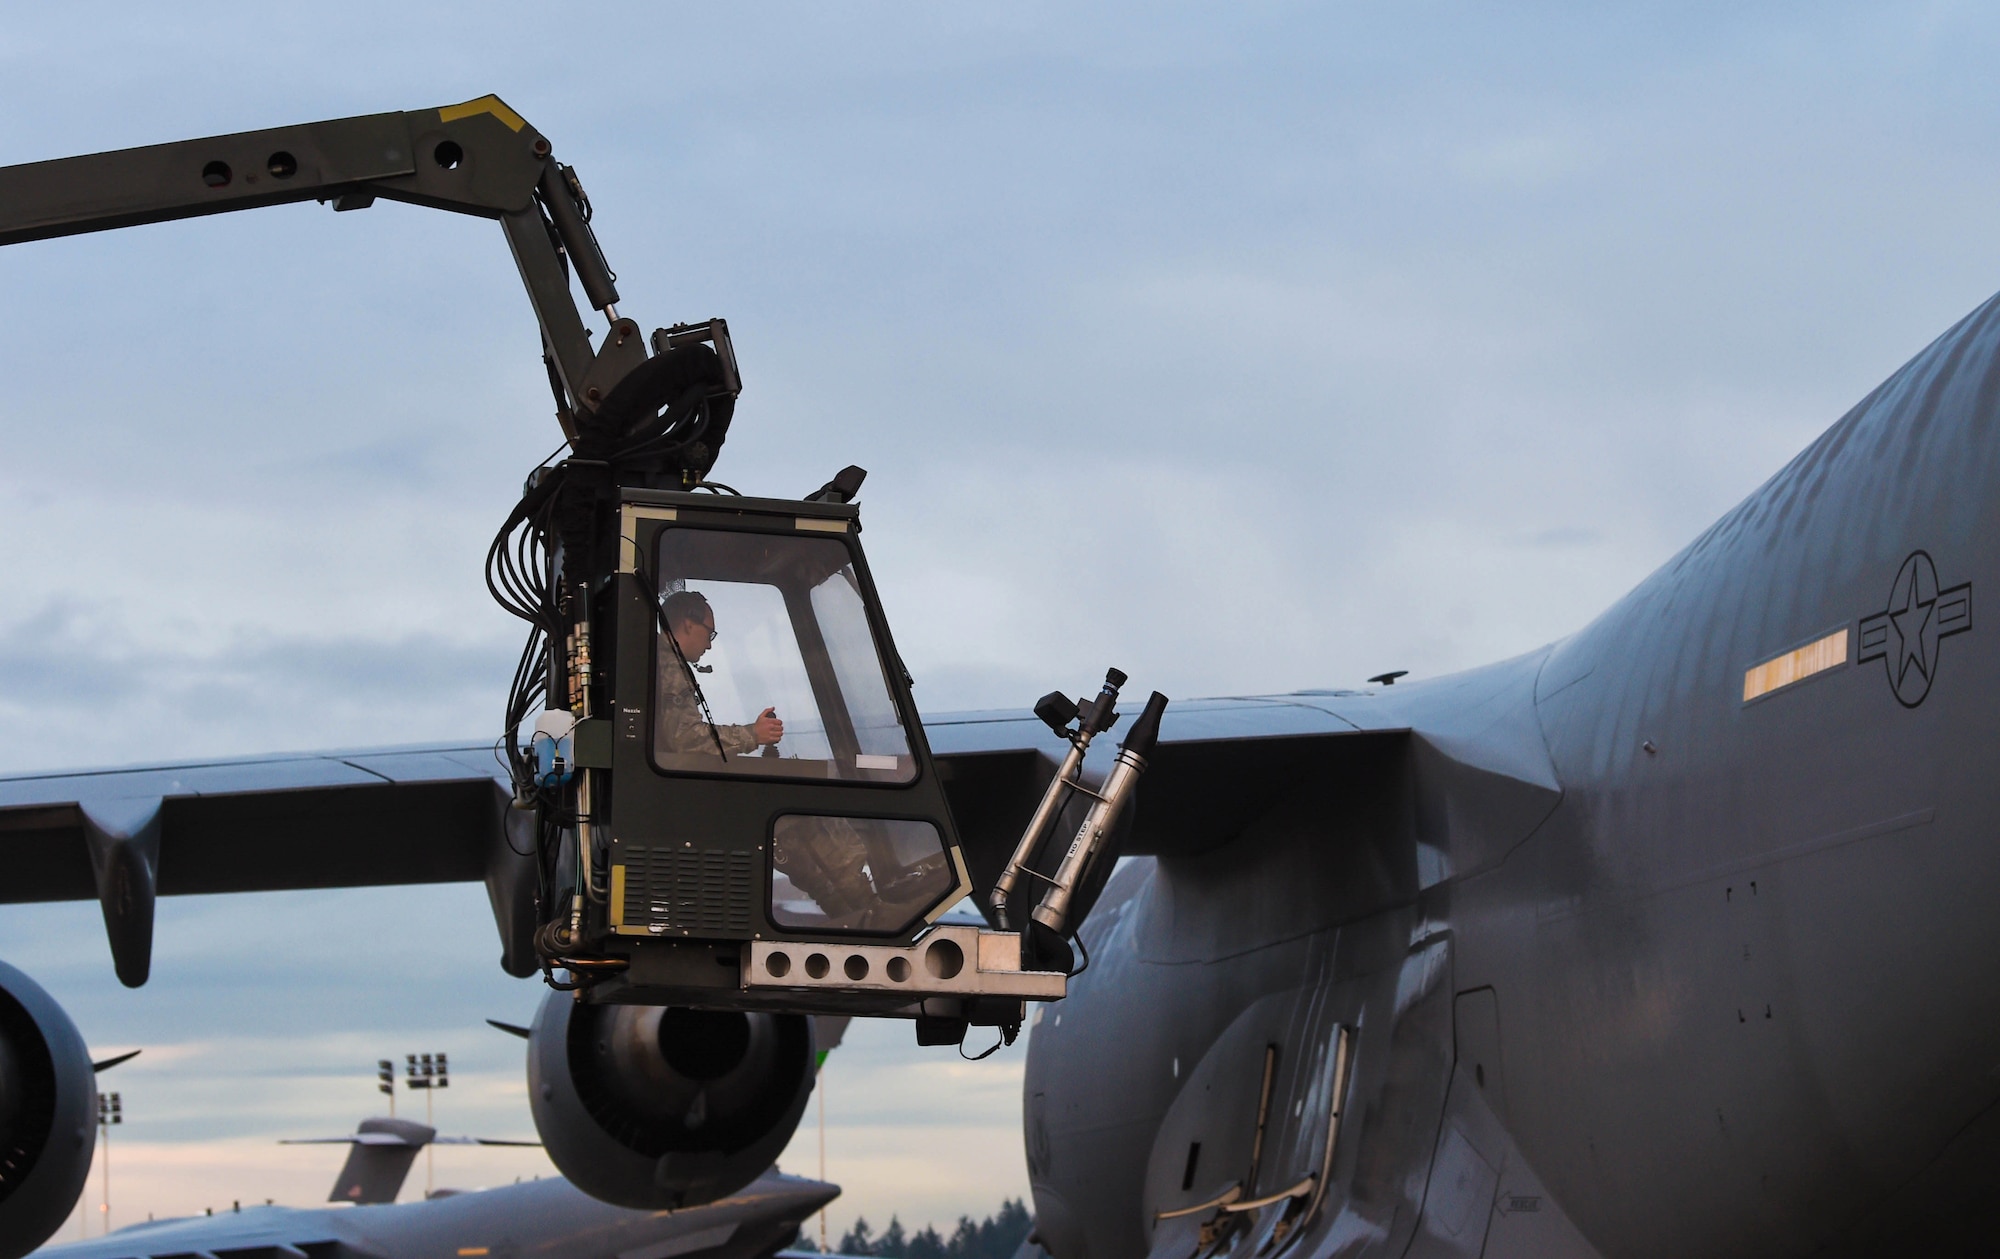 Senior Airman Dakota Crites, 62nd Aircraft Maintenance integrated flight control systems specialist, brings the bucket of a deicing truck down to the ground after deicing a C-17 Globemaster III at Joint Base Lewis-McChord, Wash., Jan. 16, 2019. Crites and other 62nd AMXS Airmen sprayed deicing liquid on the wings and tail of the C-17 to remove snow and ice from the aircraft and make it safe to fly. (U.S. Air Force photo by Senior Airman Tryphena Mayhugh)